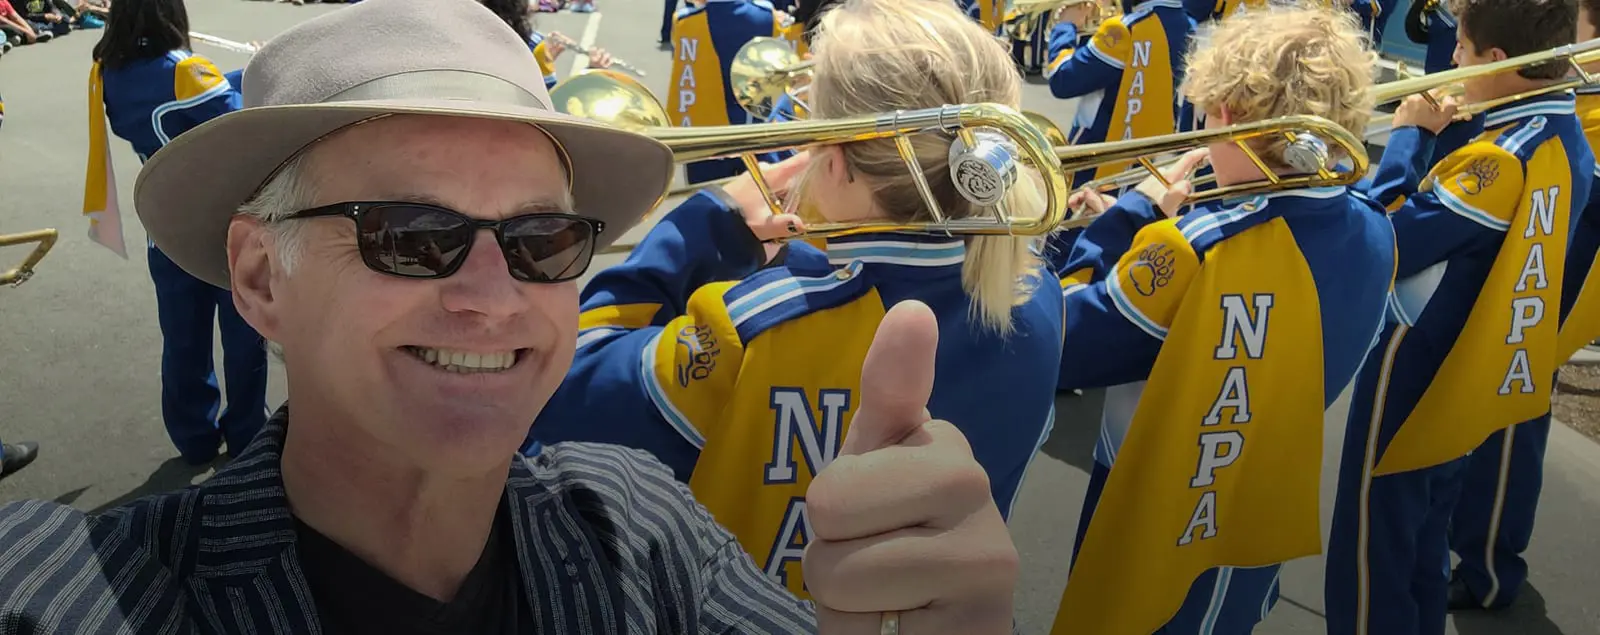 Man smiling with Napa school band in the background